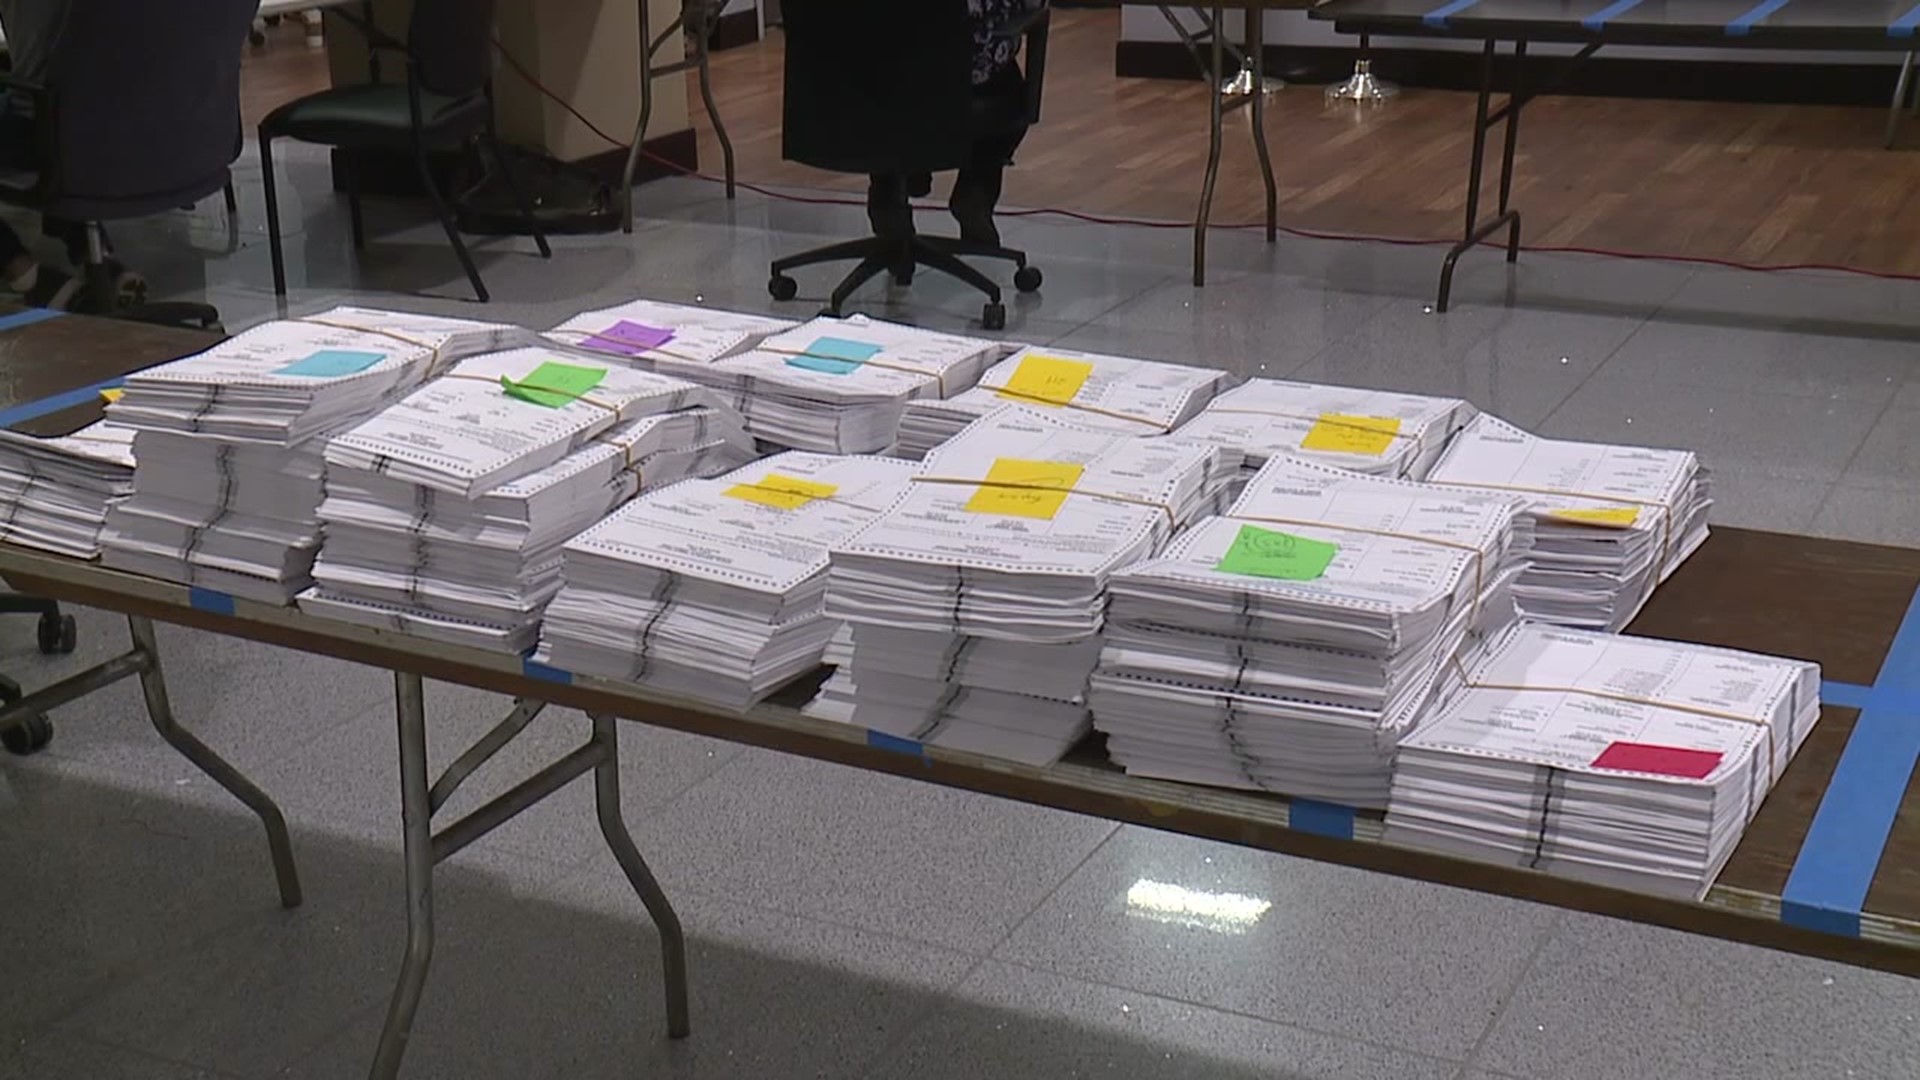 Counting approximately 30,000 ballots wrapped up Wednesday.